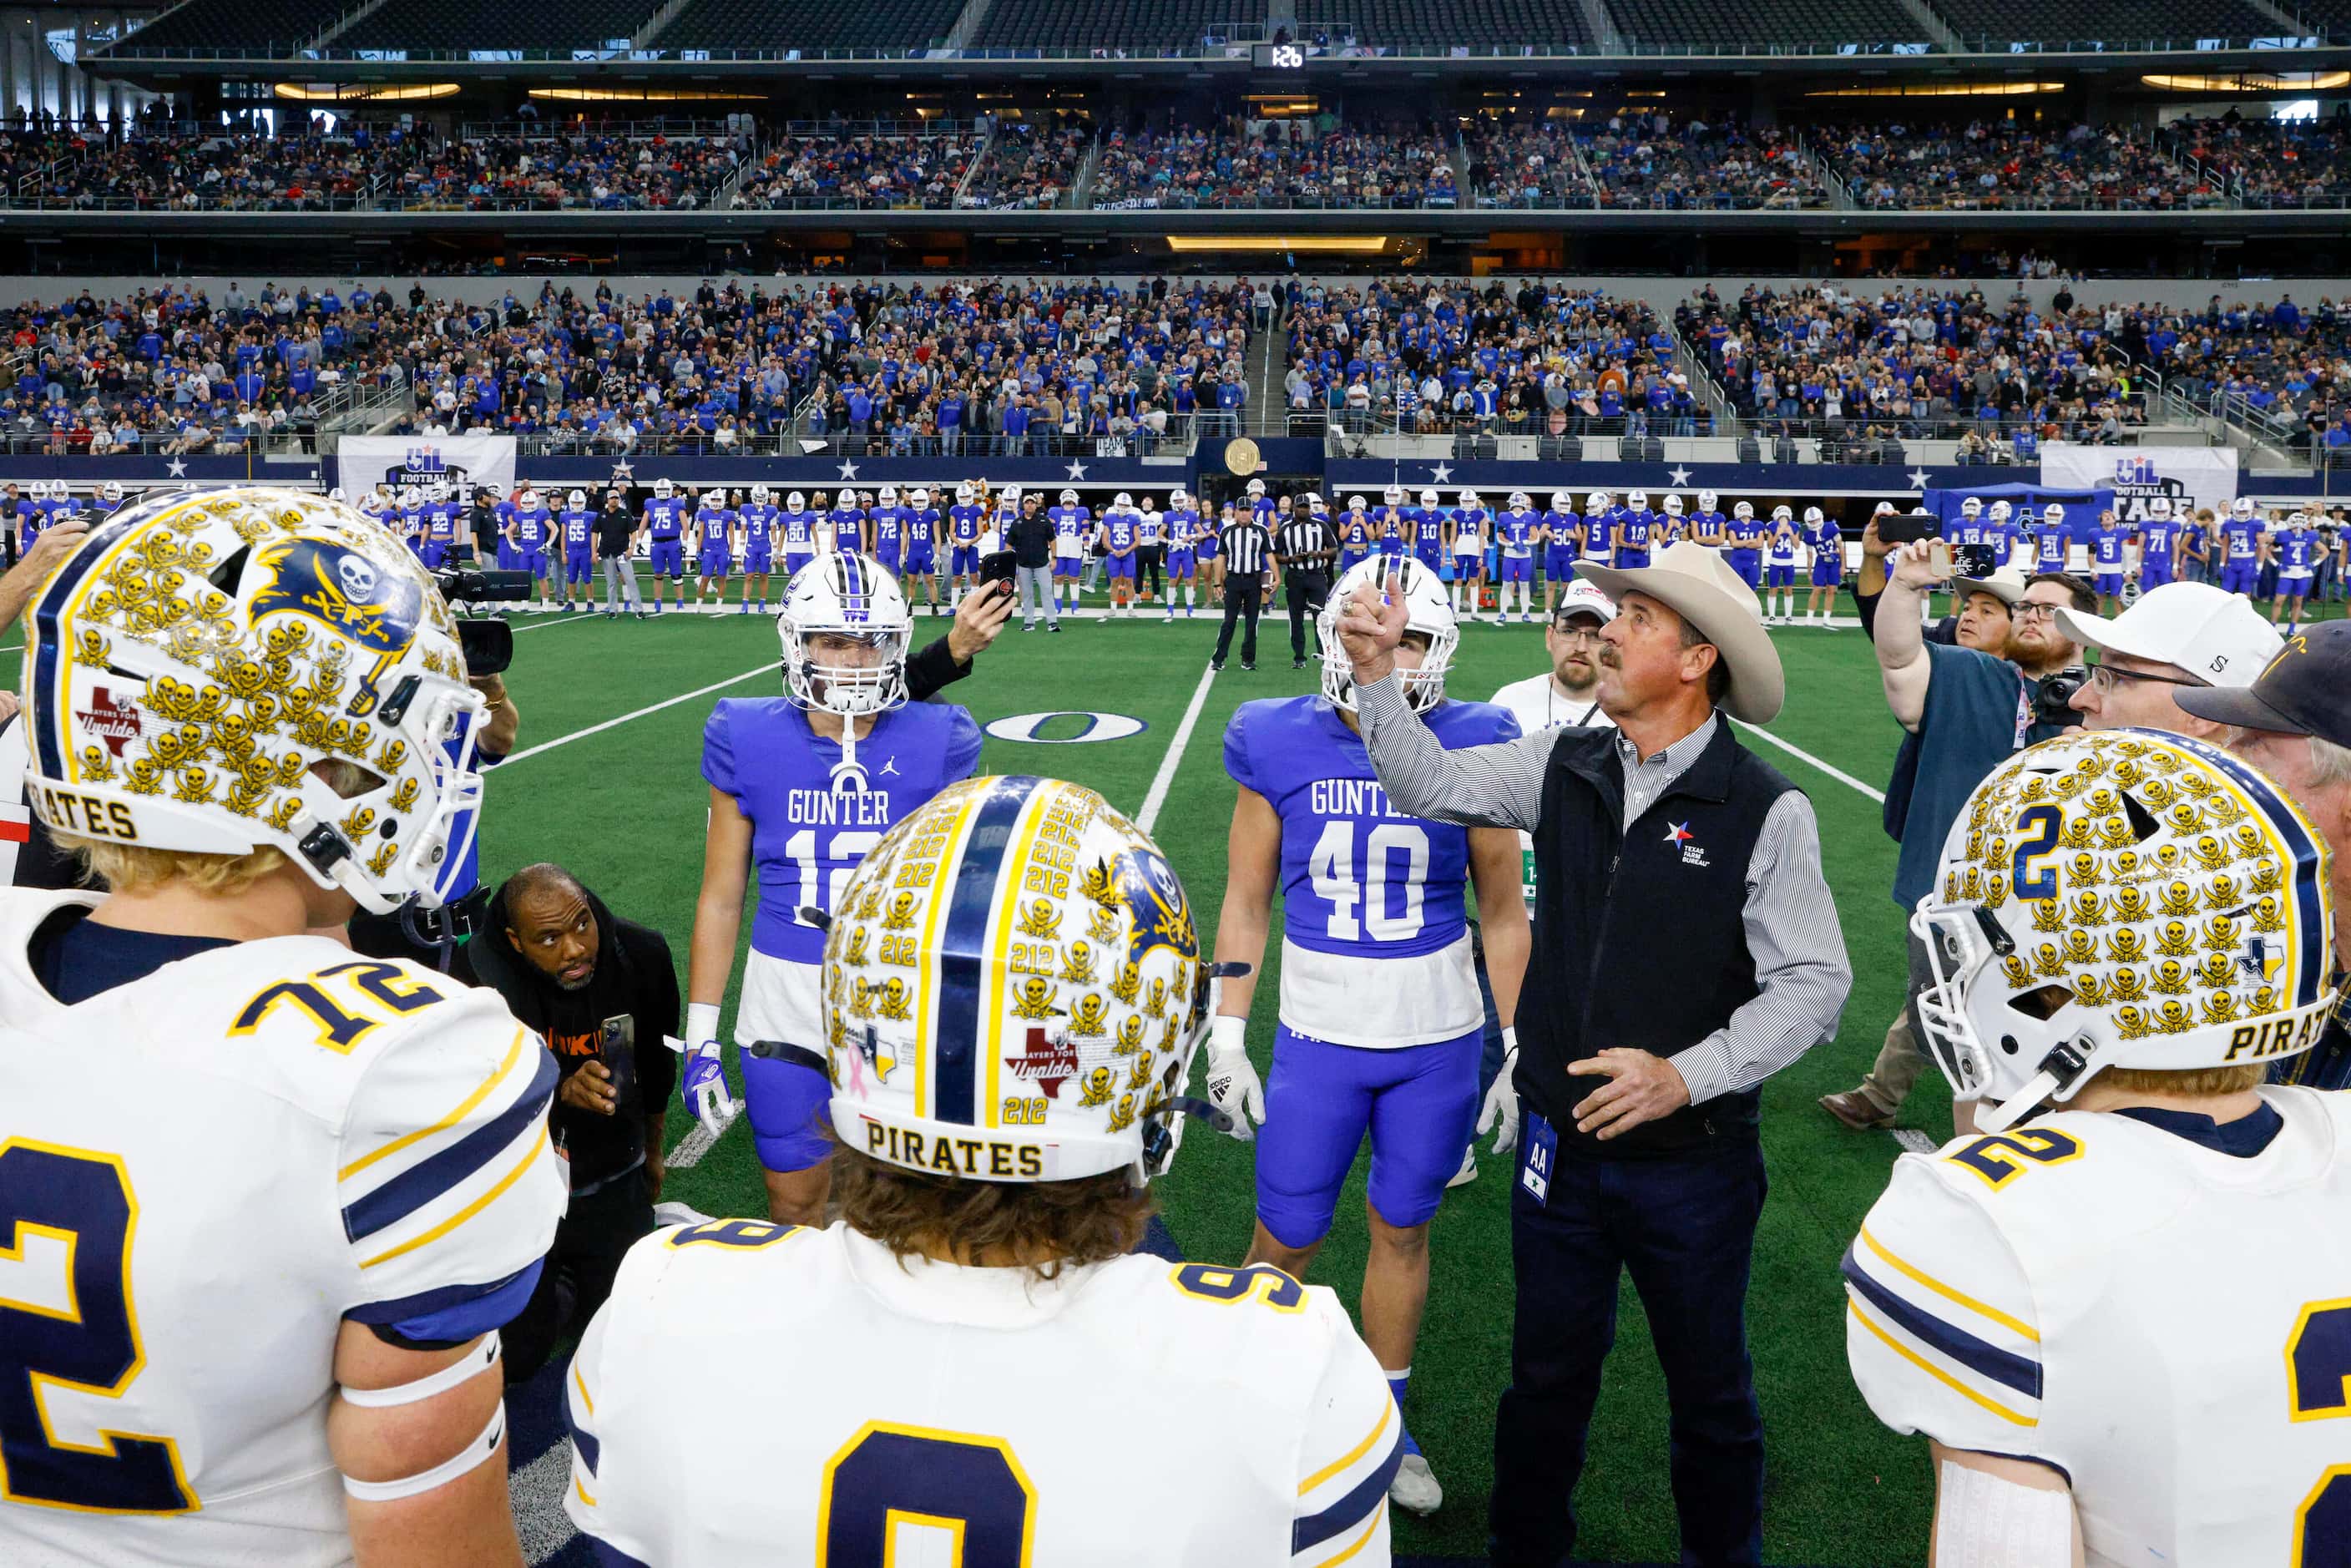 The Poth and Gunter captains watch as the coin toss is performed before the first half of...